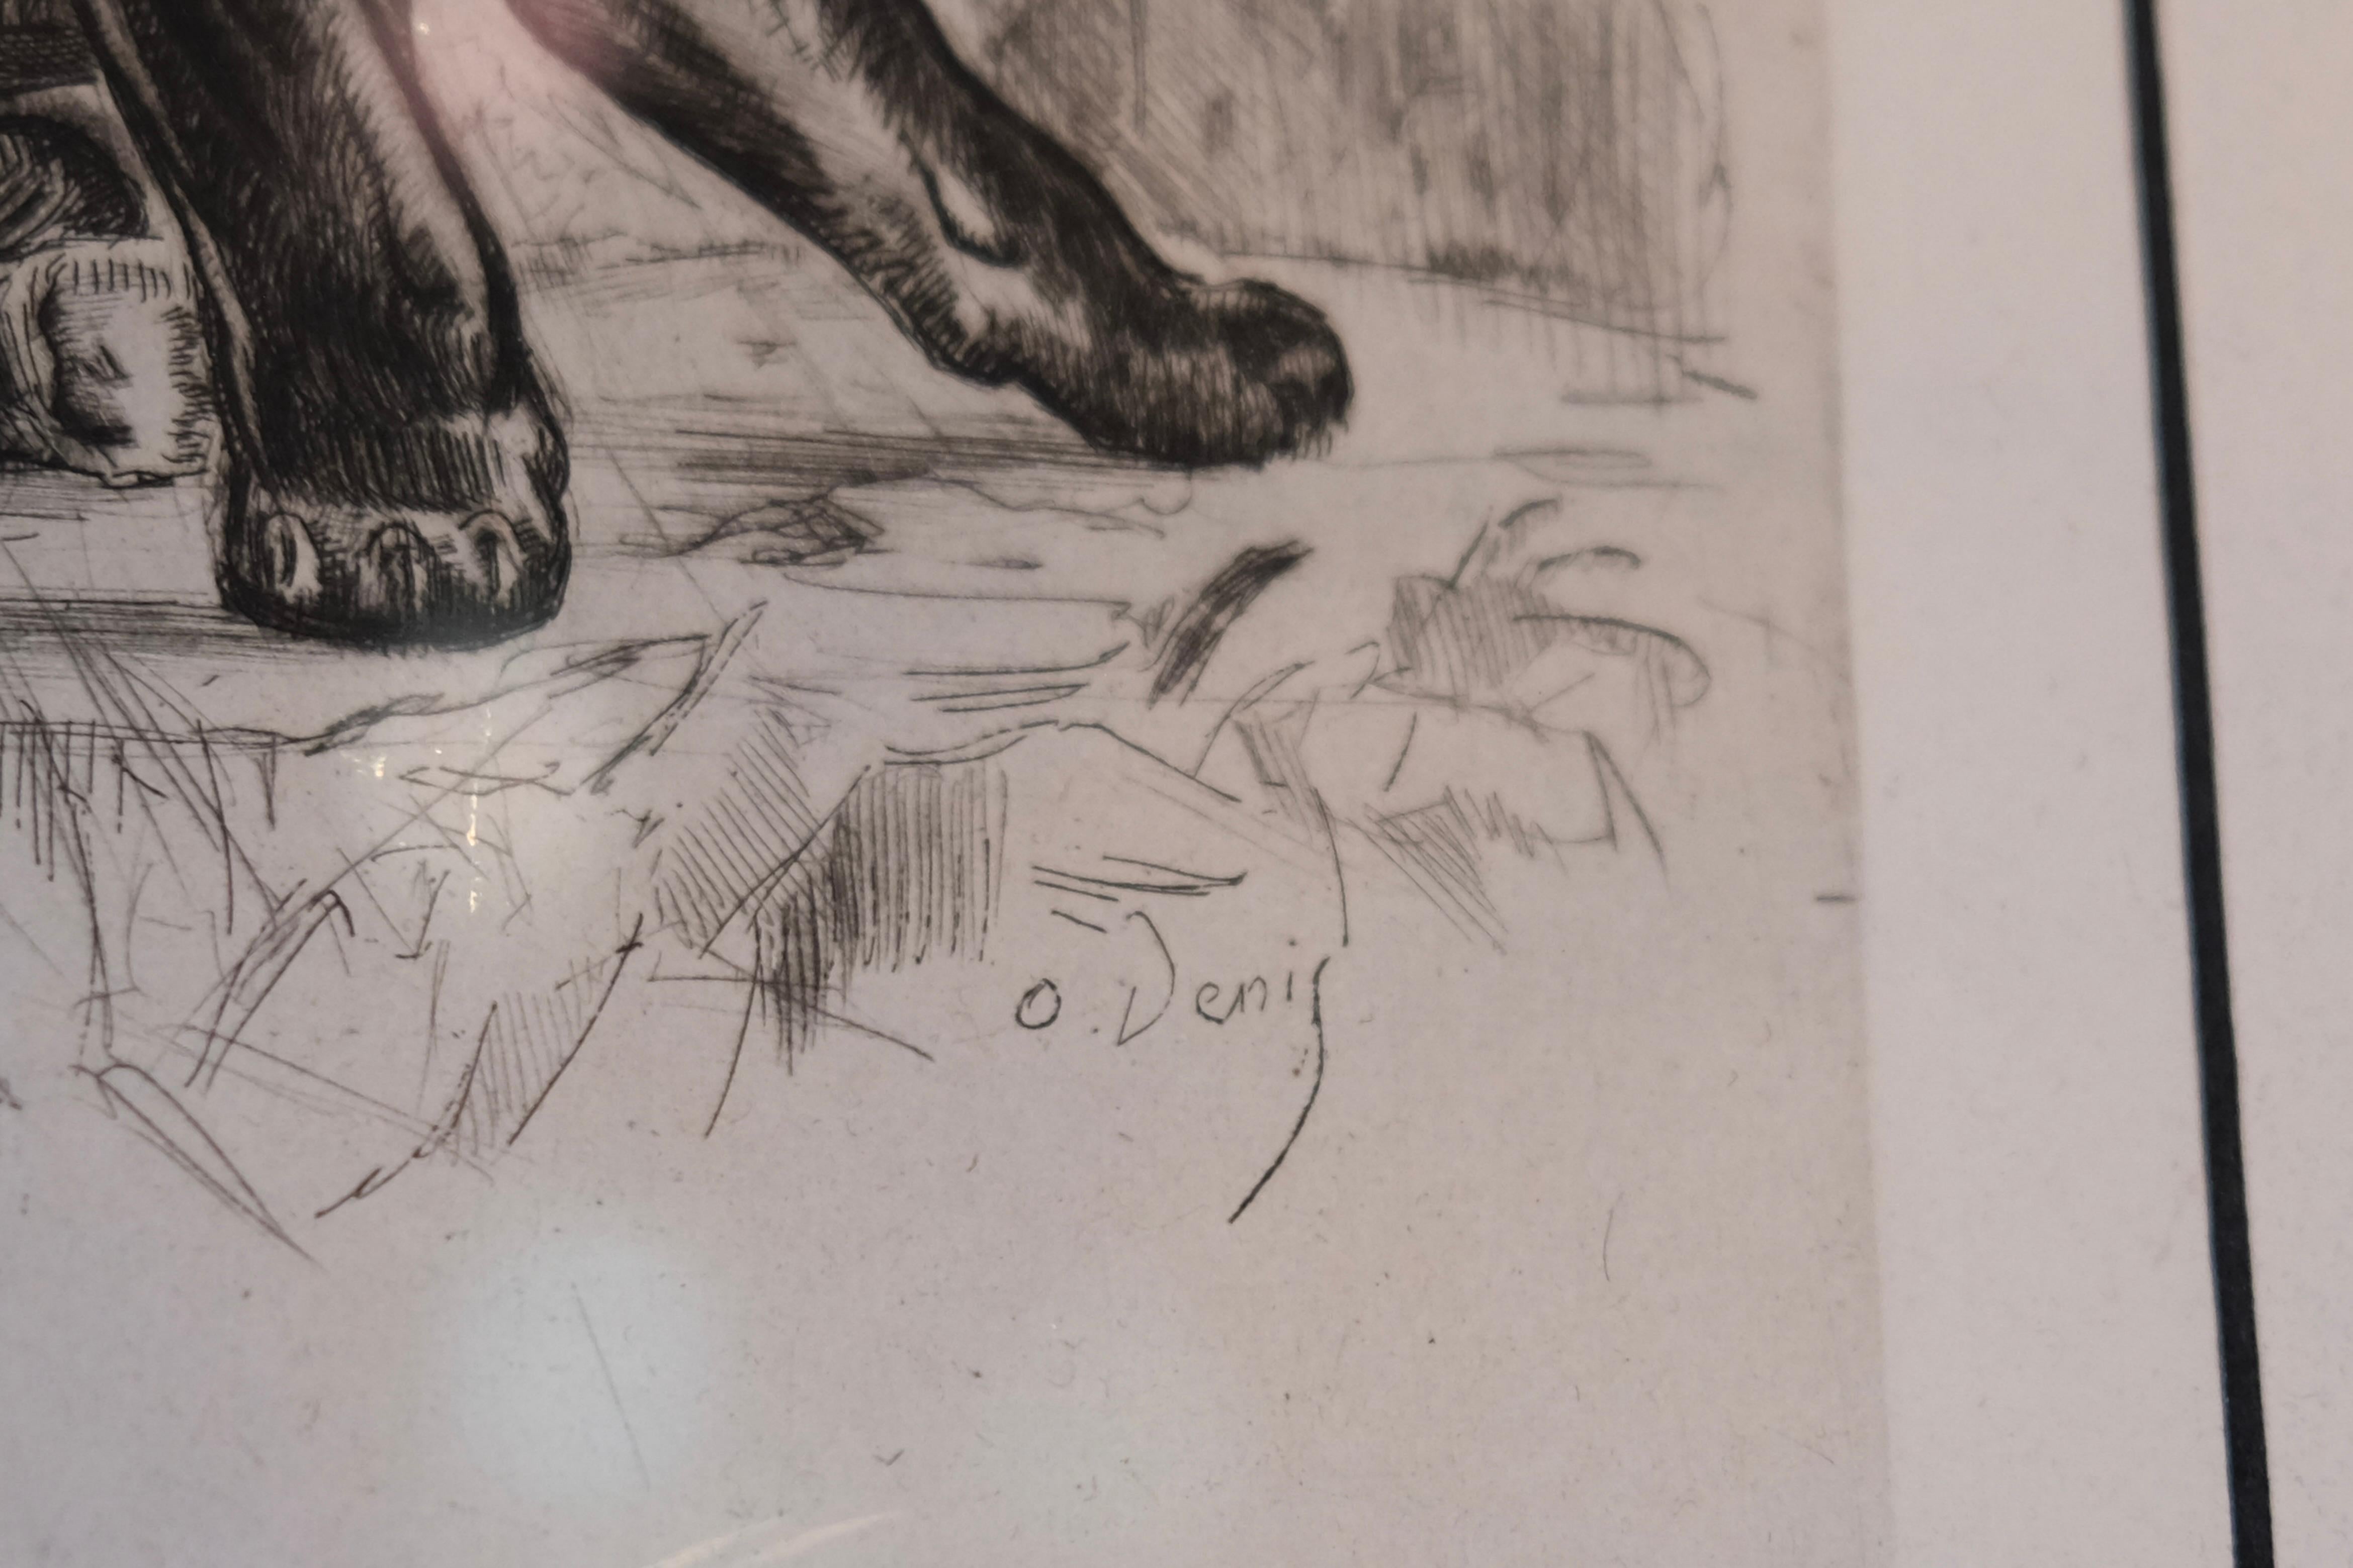 Glass Etching and Drypoint of a Grooming Black Panther by Odette Denis For Sale